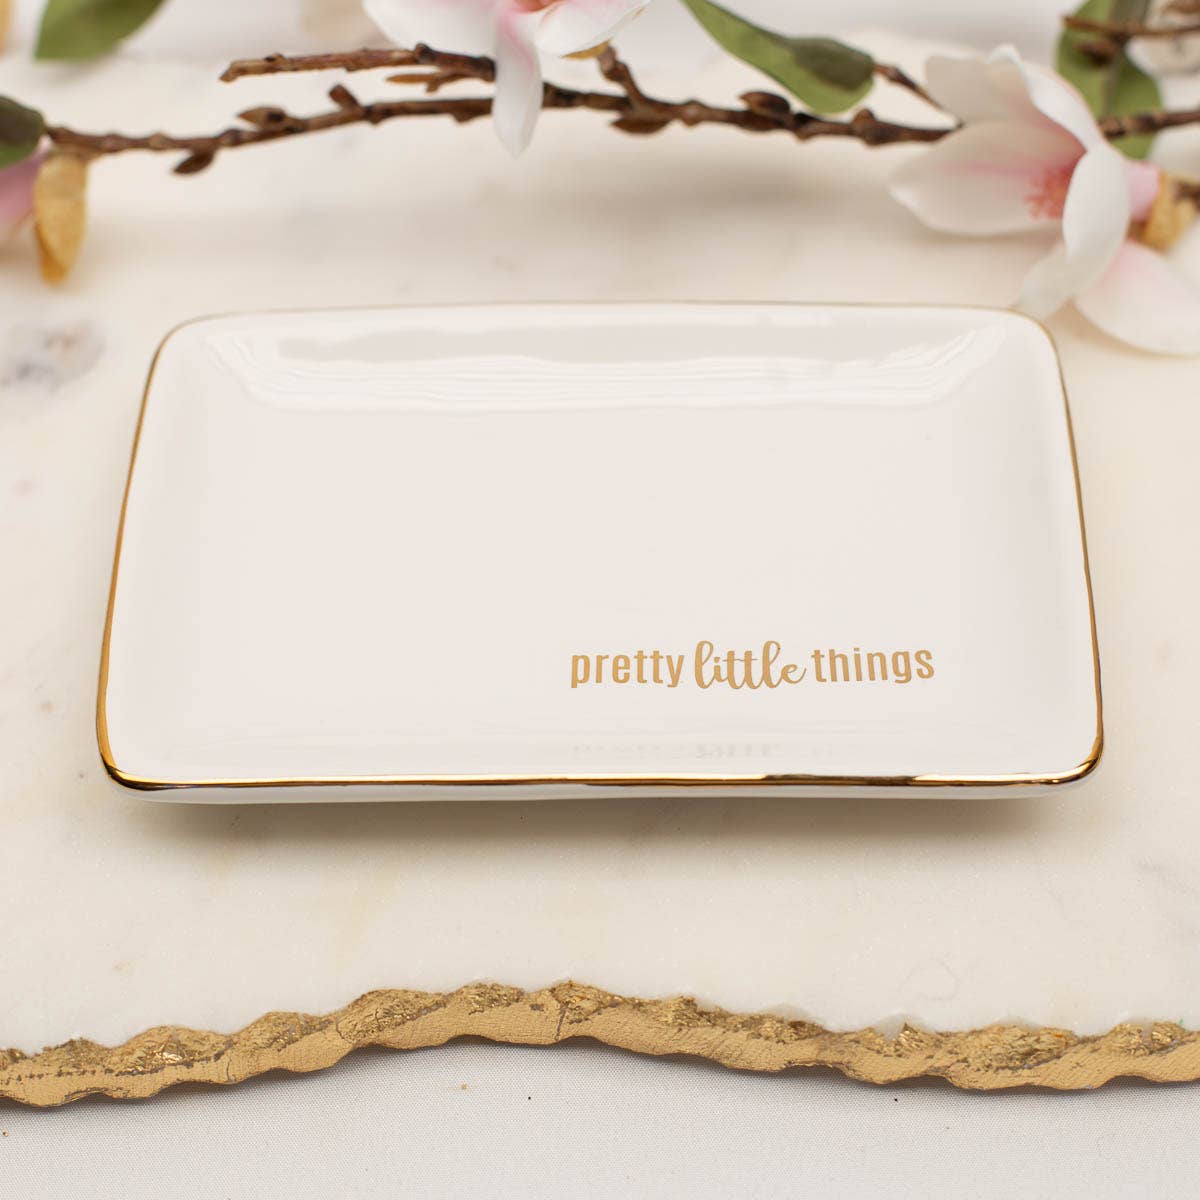 Pretty Little Things Trinket Dish White/Gold 6x4 – Jeannine's Gifts RVC